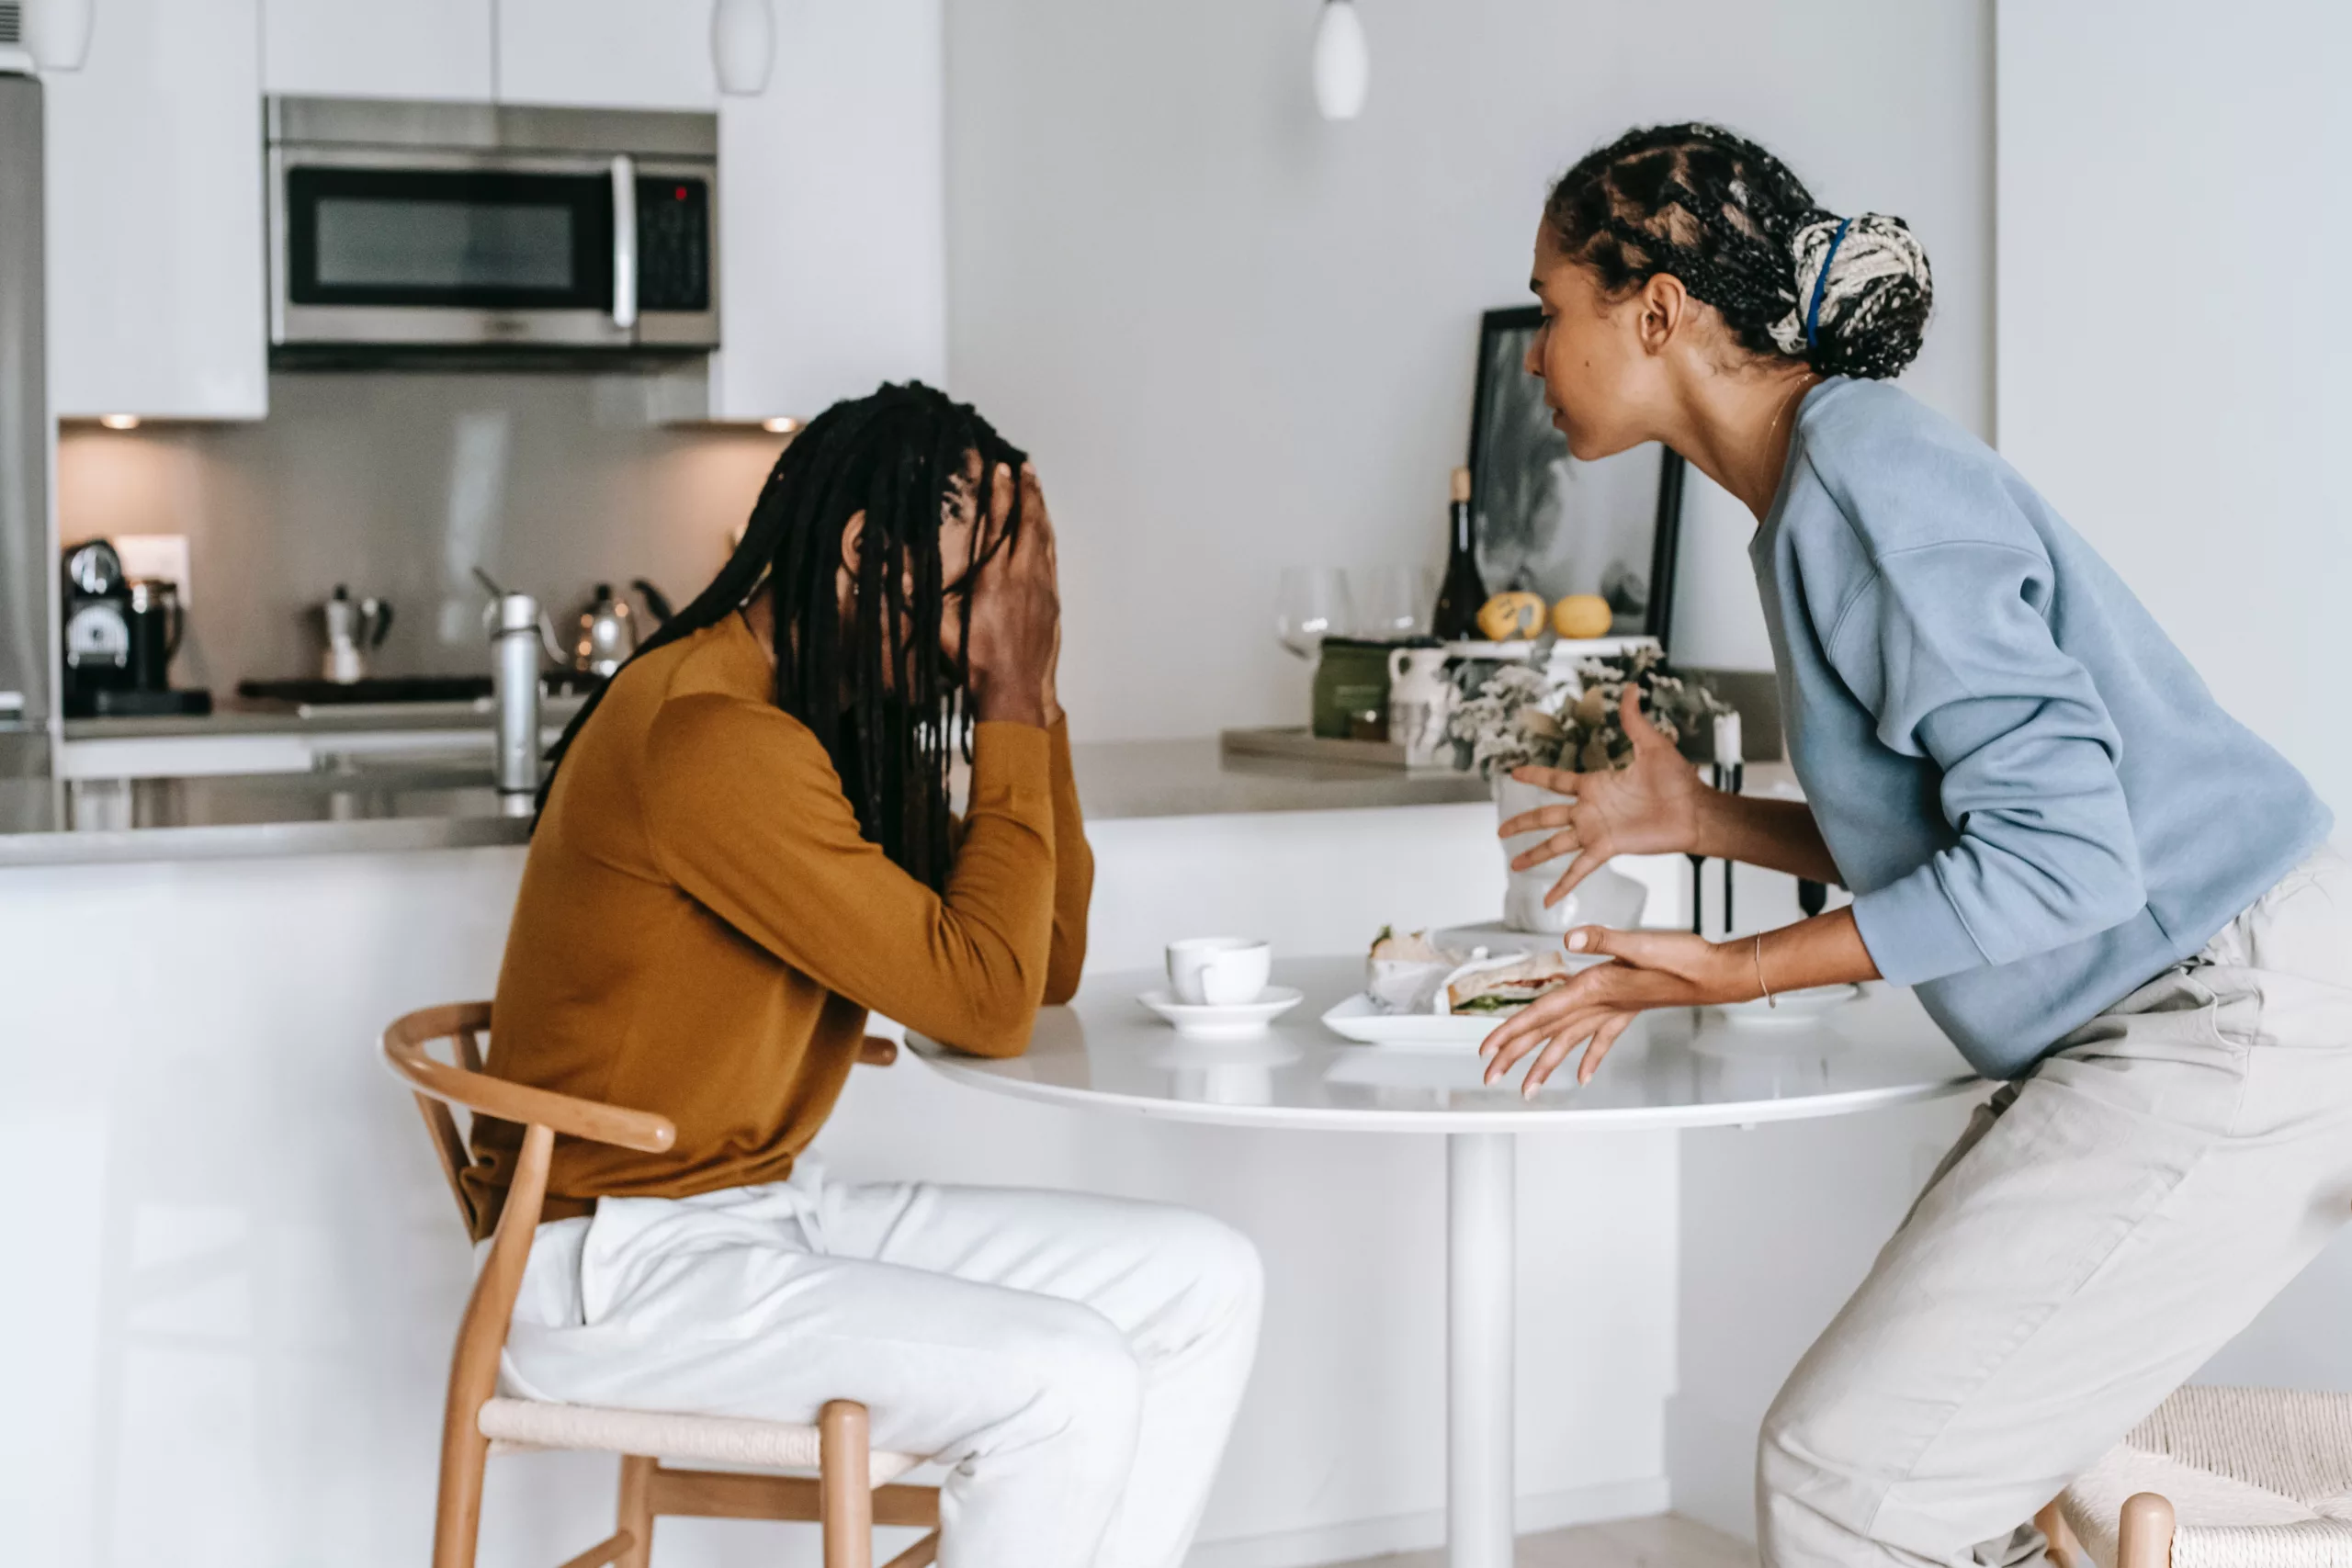 20 Signs She's Using You and Keeping You as an Option: What You Can Do